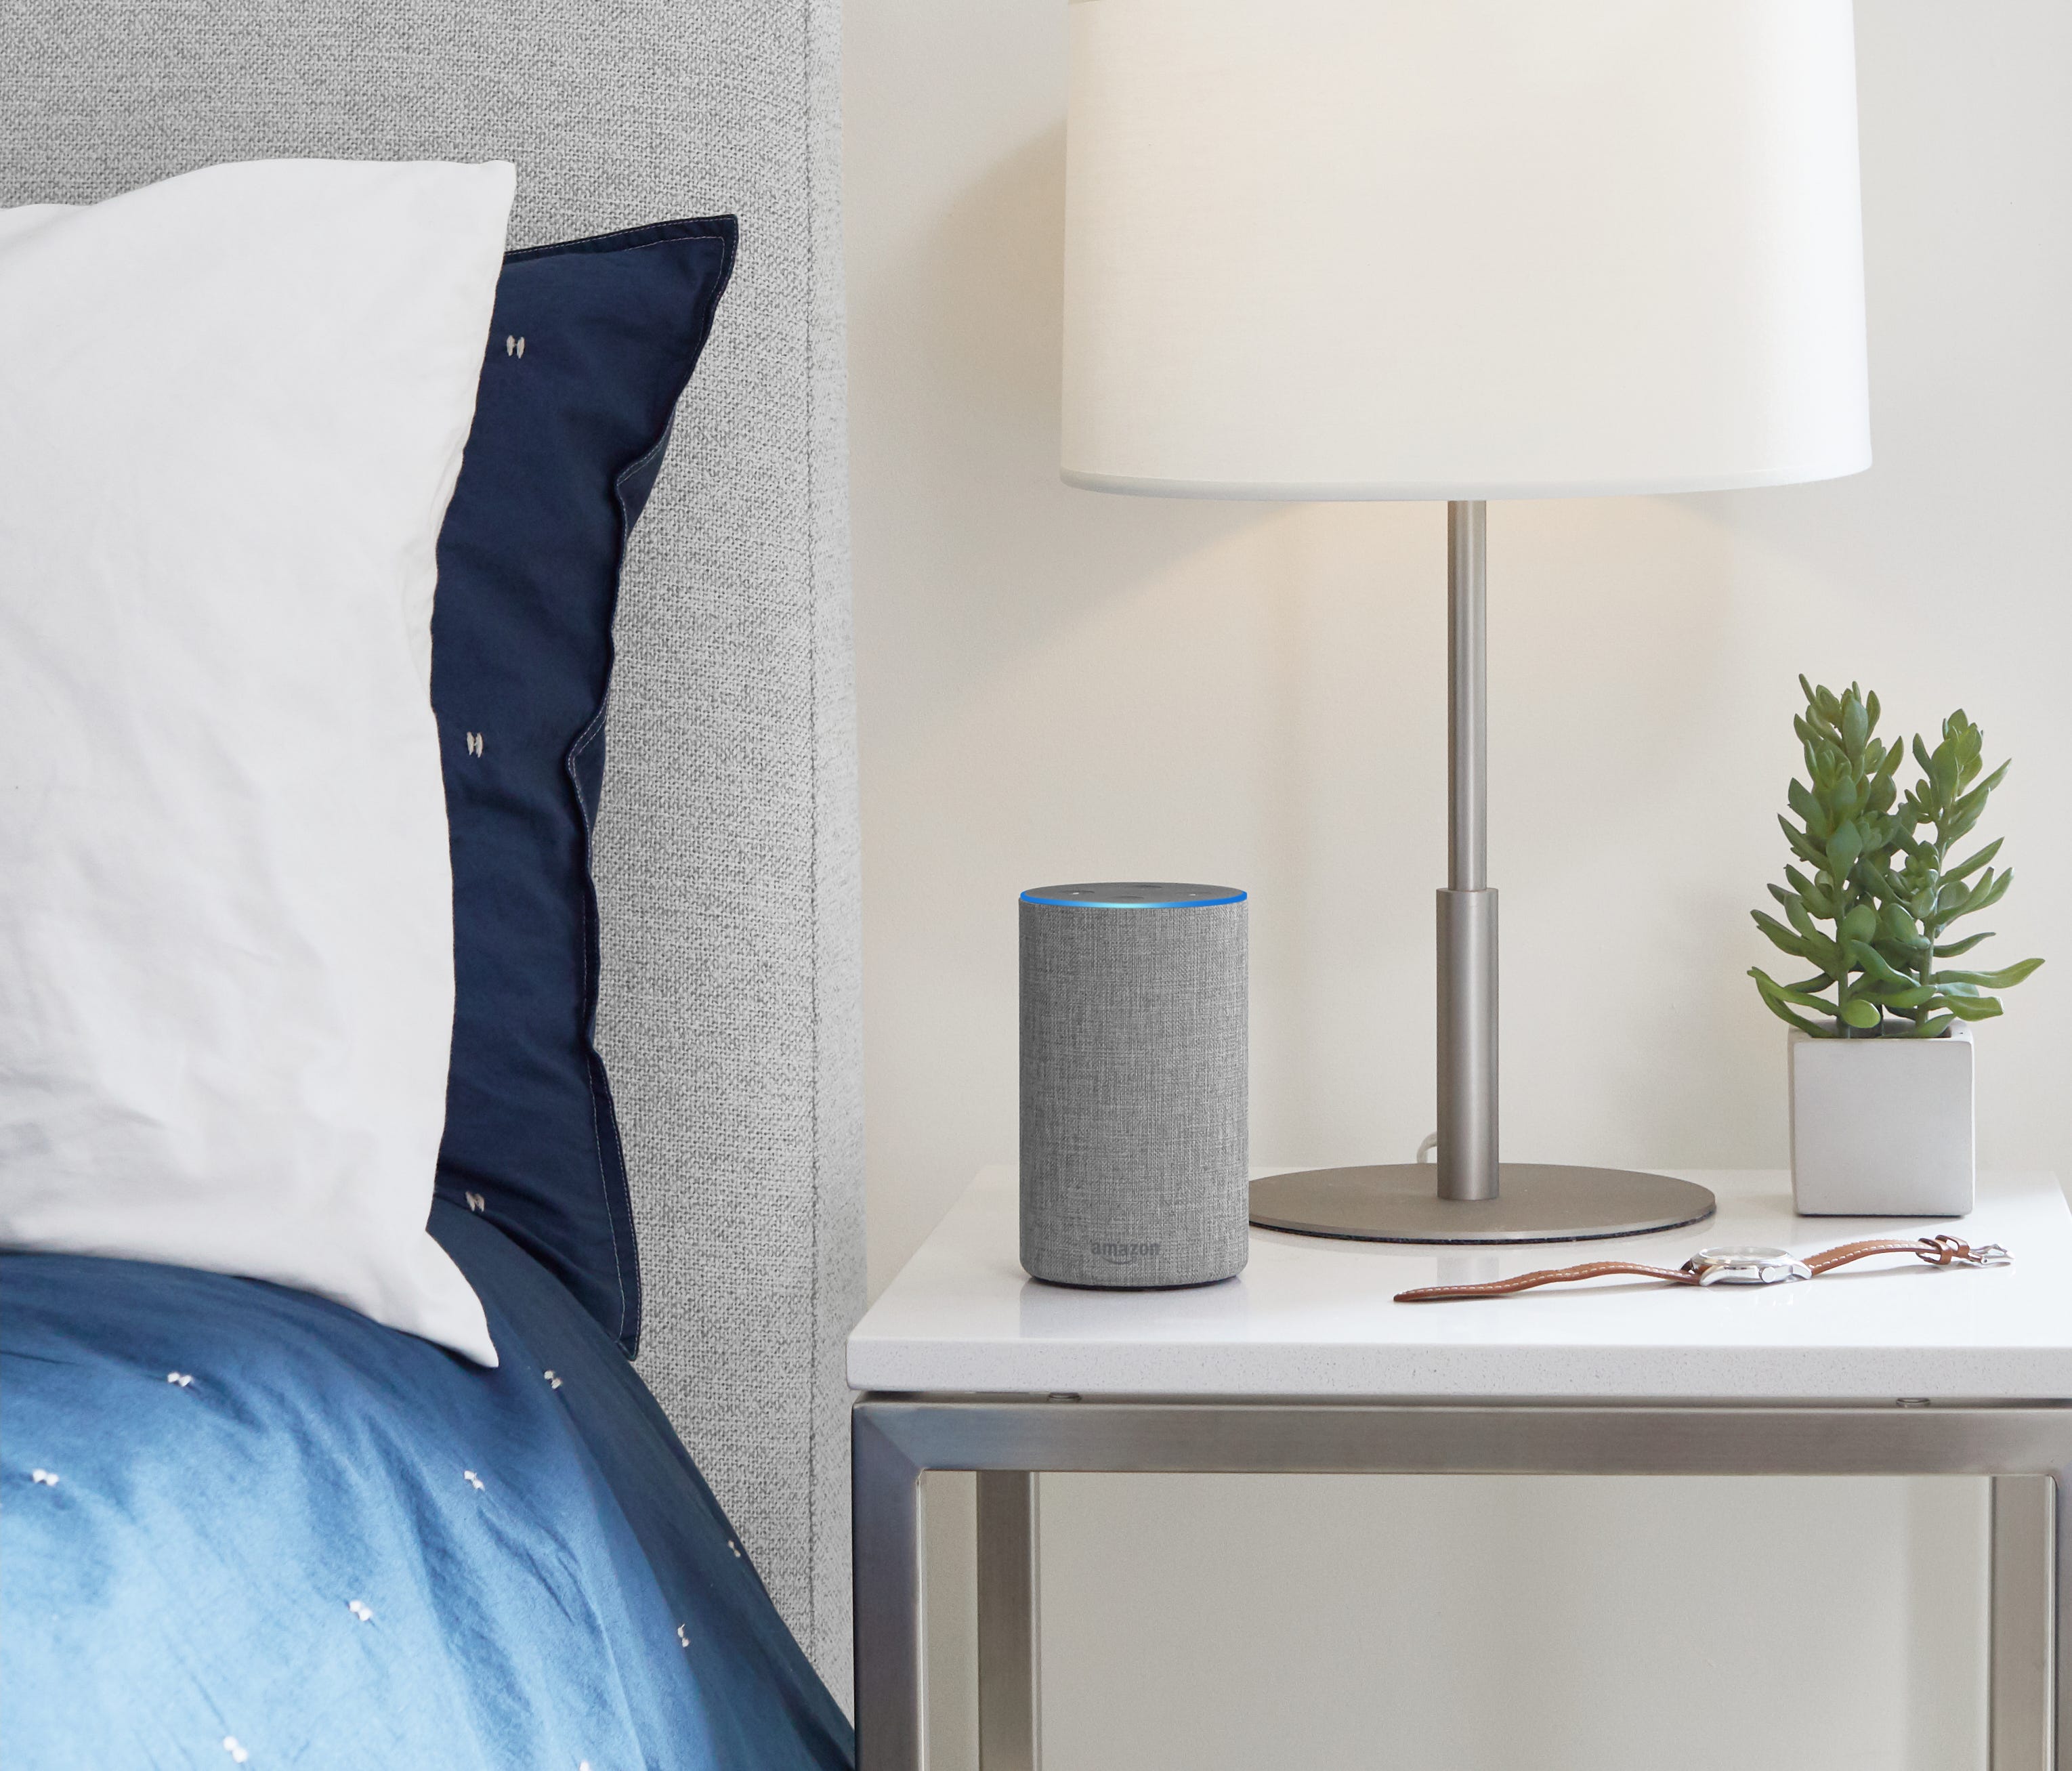 Amazon has developed a new Alexis for Hospitality for hotels.